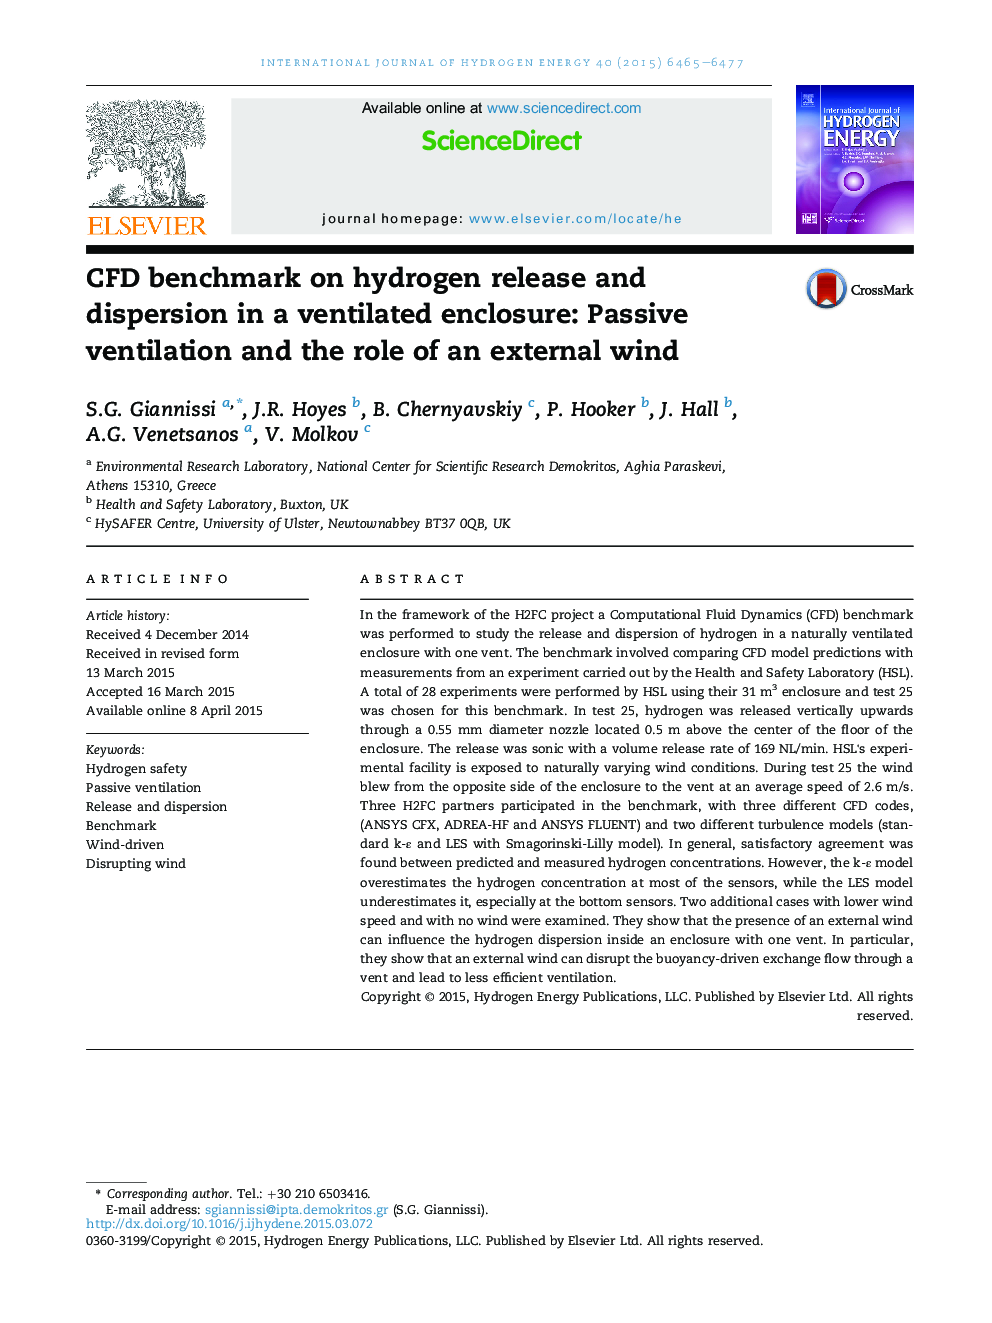 CFD benchmark on hydrogen release and dispersion in a ventilated enclosure: Passive ventilation and the role of an external wind